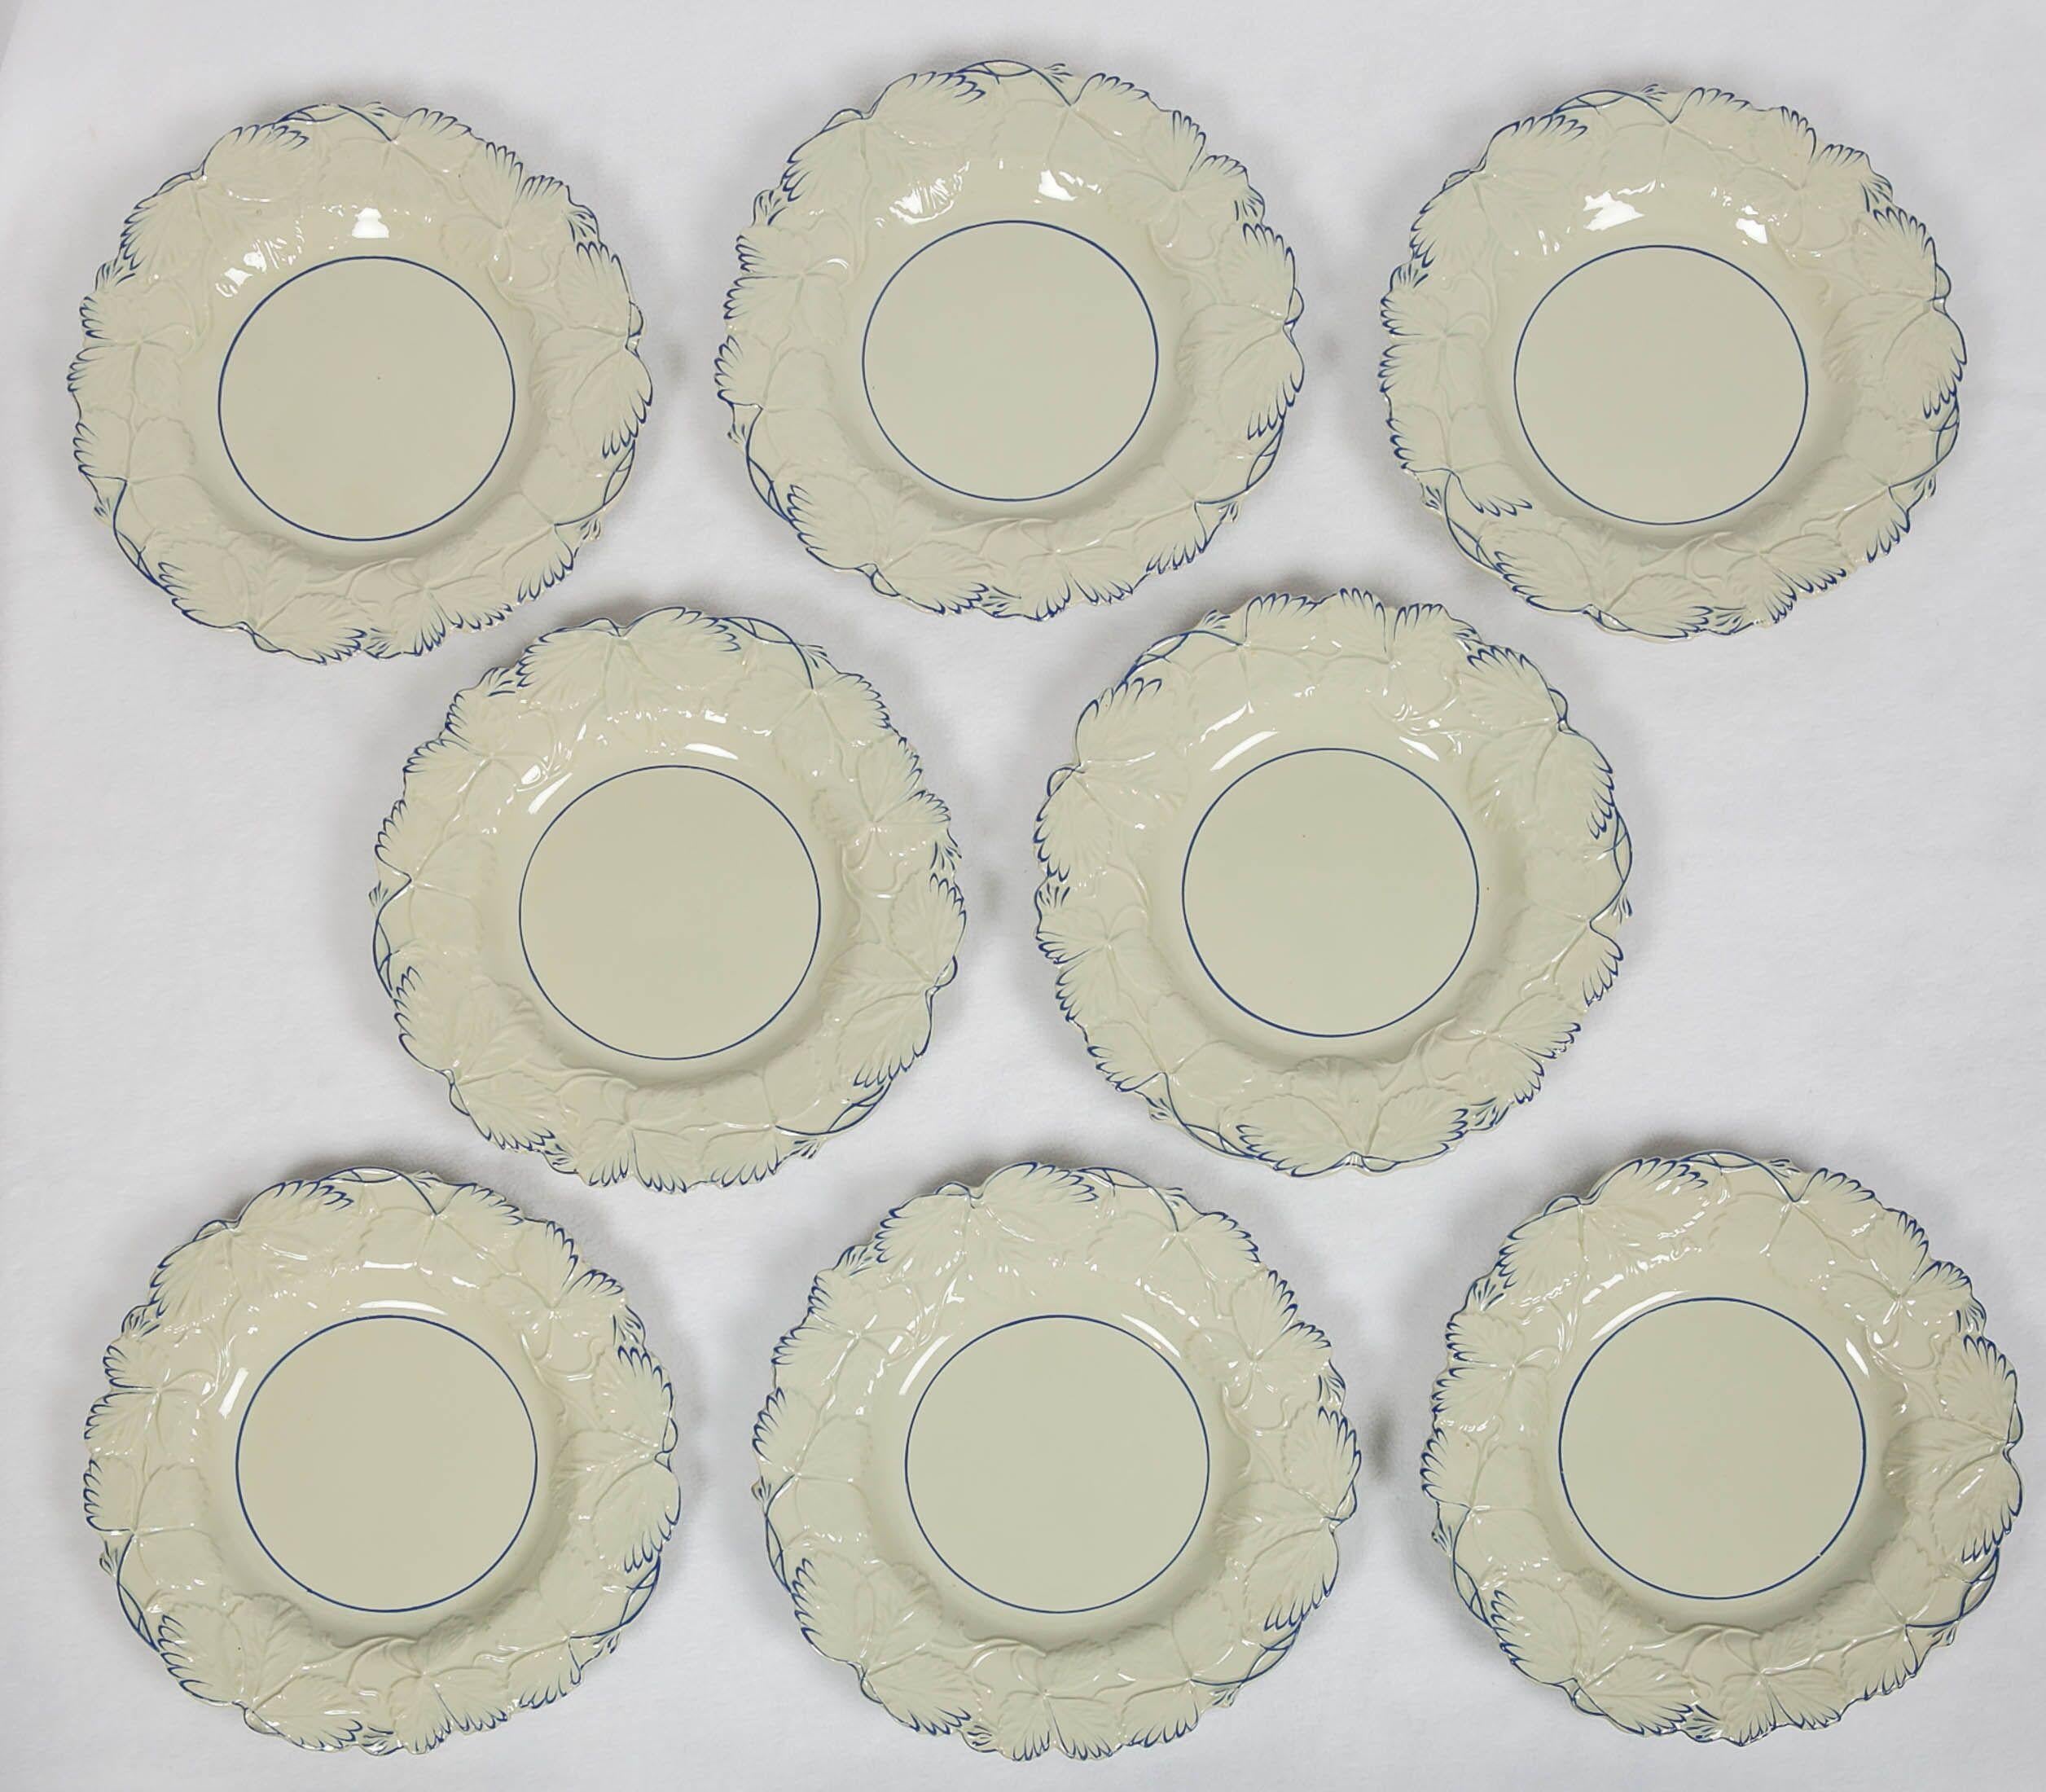 WHY WE LOVE IT: Often less is more.
We are pleased to present this set of fourteen drabware plates made in England in the mid-19th century. Drabware is distinctive from other pottery because the color of the plate is the color of the original clay.